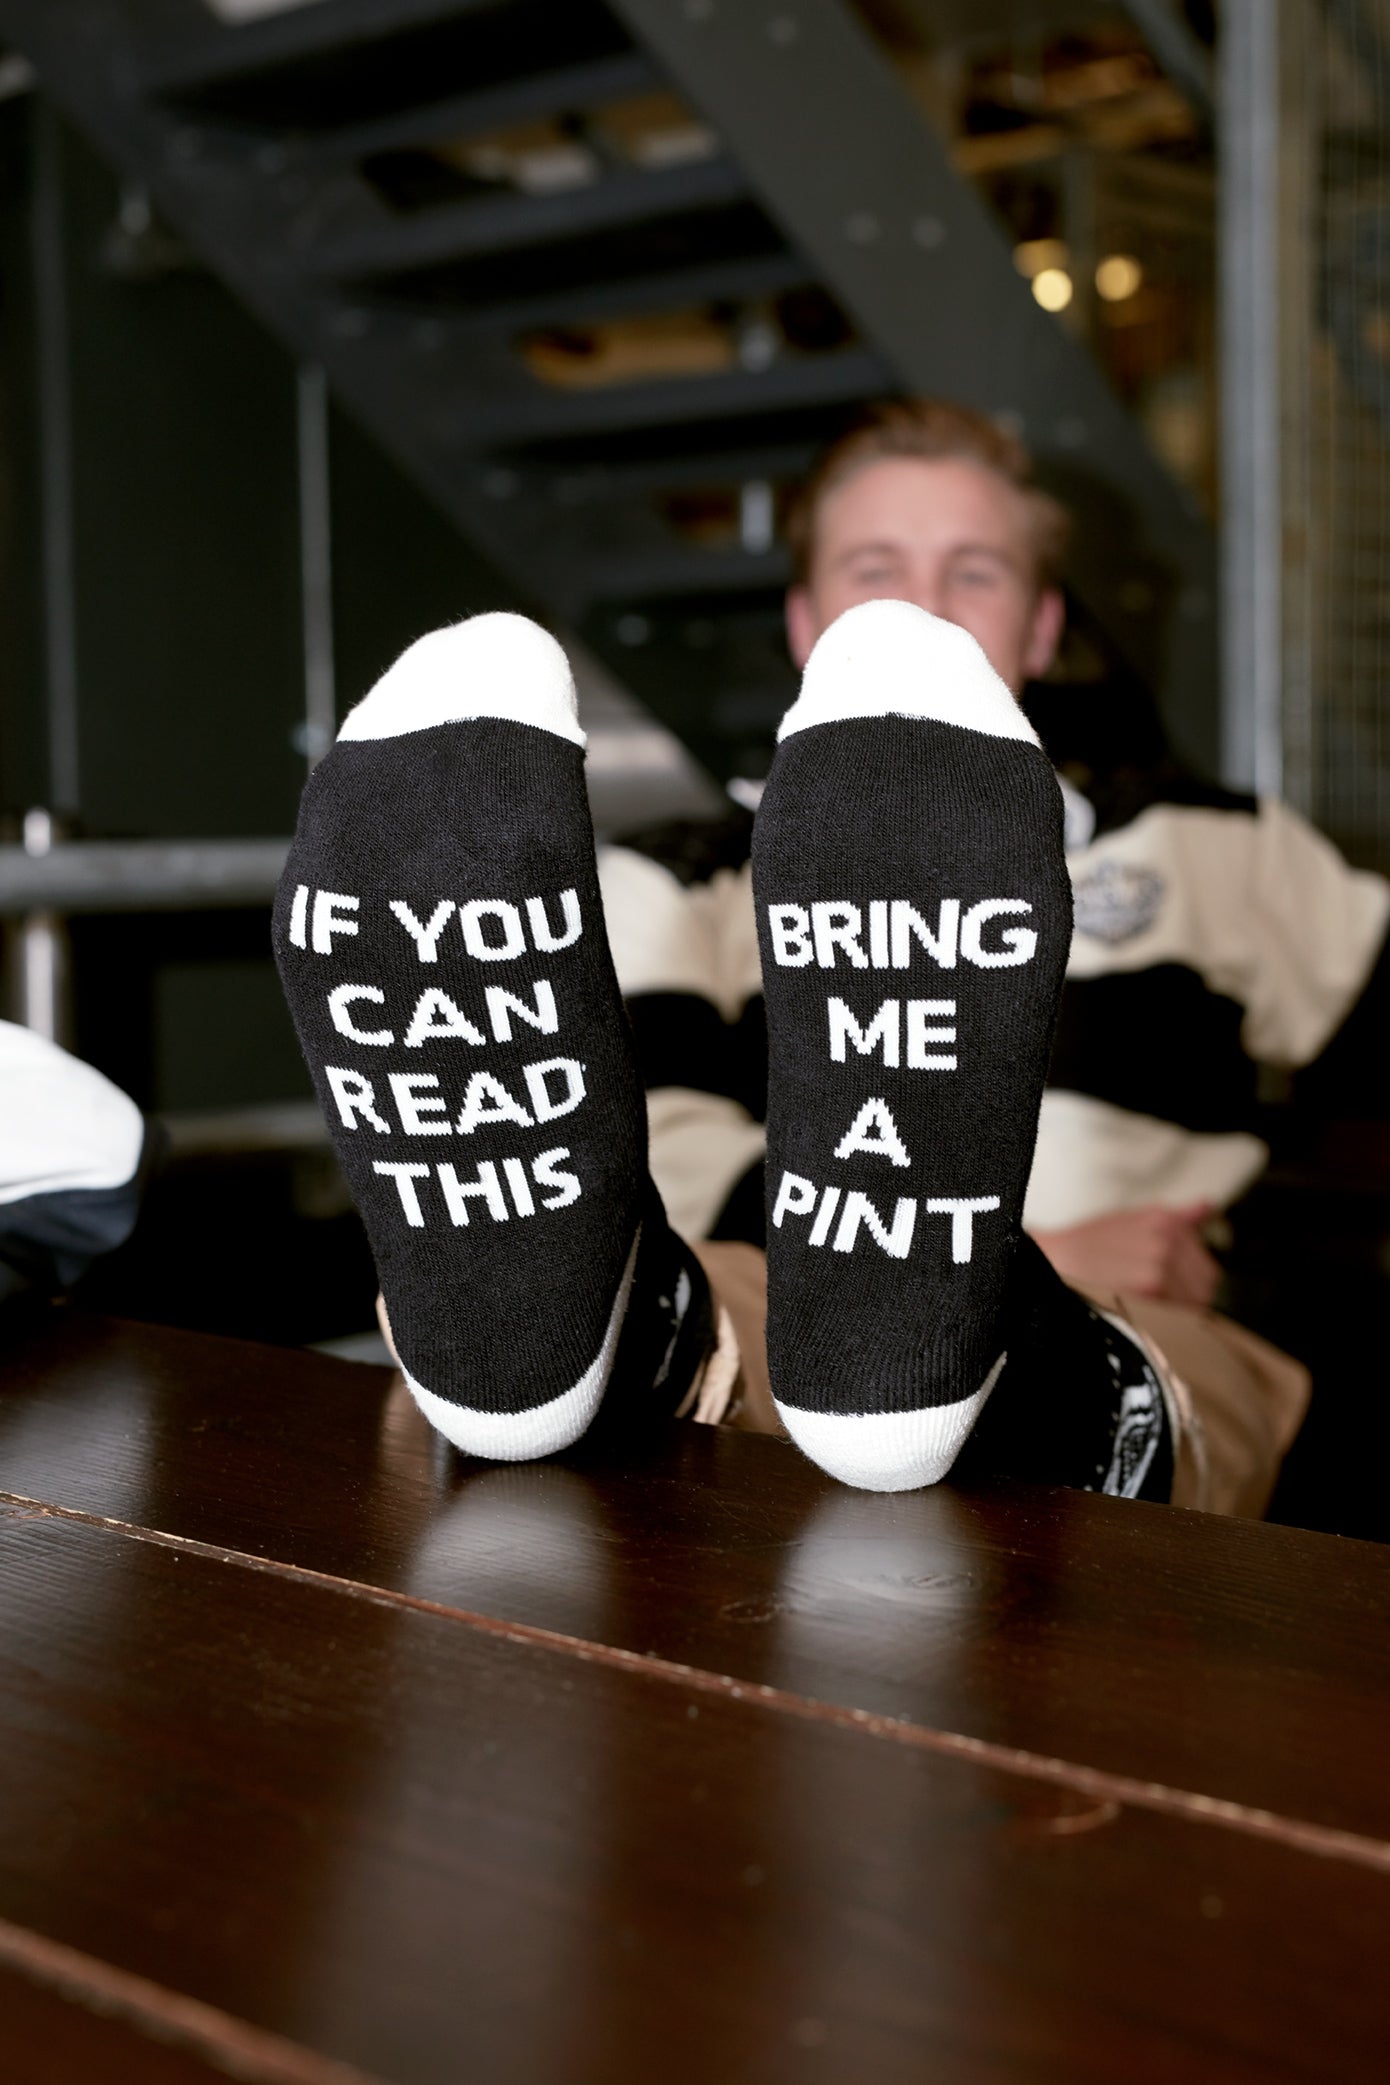 Bring me these novelty Guinness UK Harp 'Bring me a Pint' Socks.